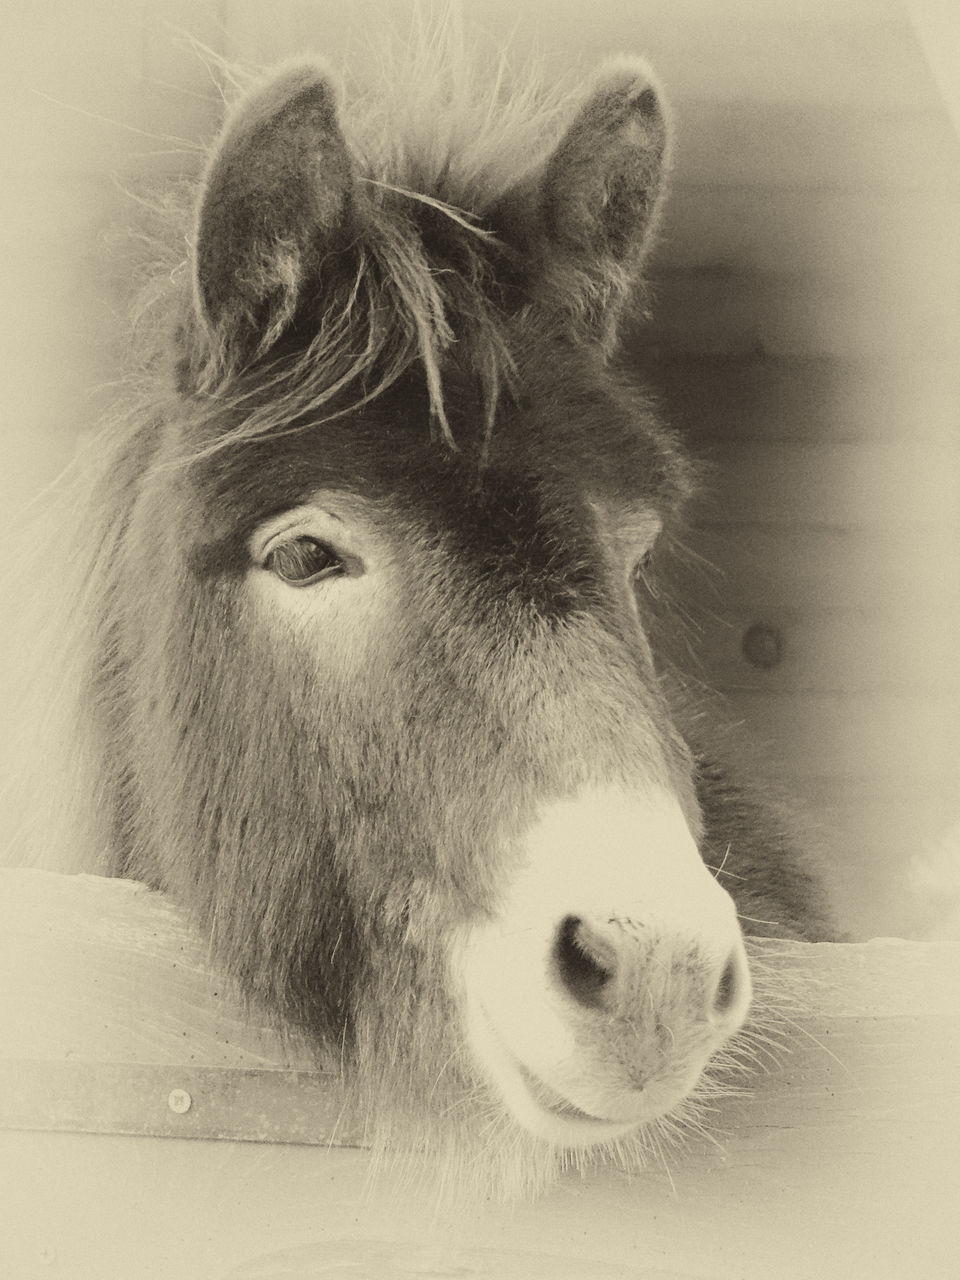 CLOSE-UP PORTRAIT OF A YOUNG A HORSE